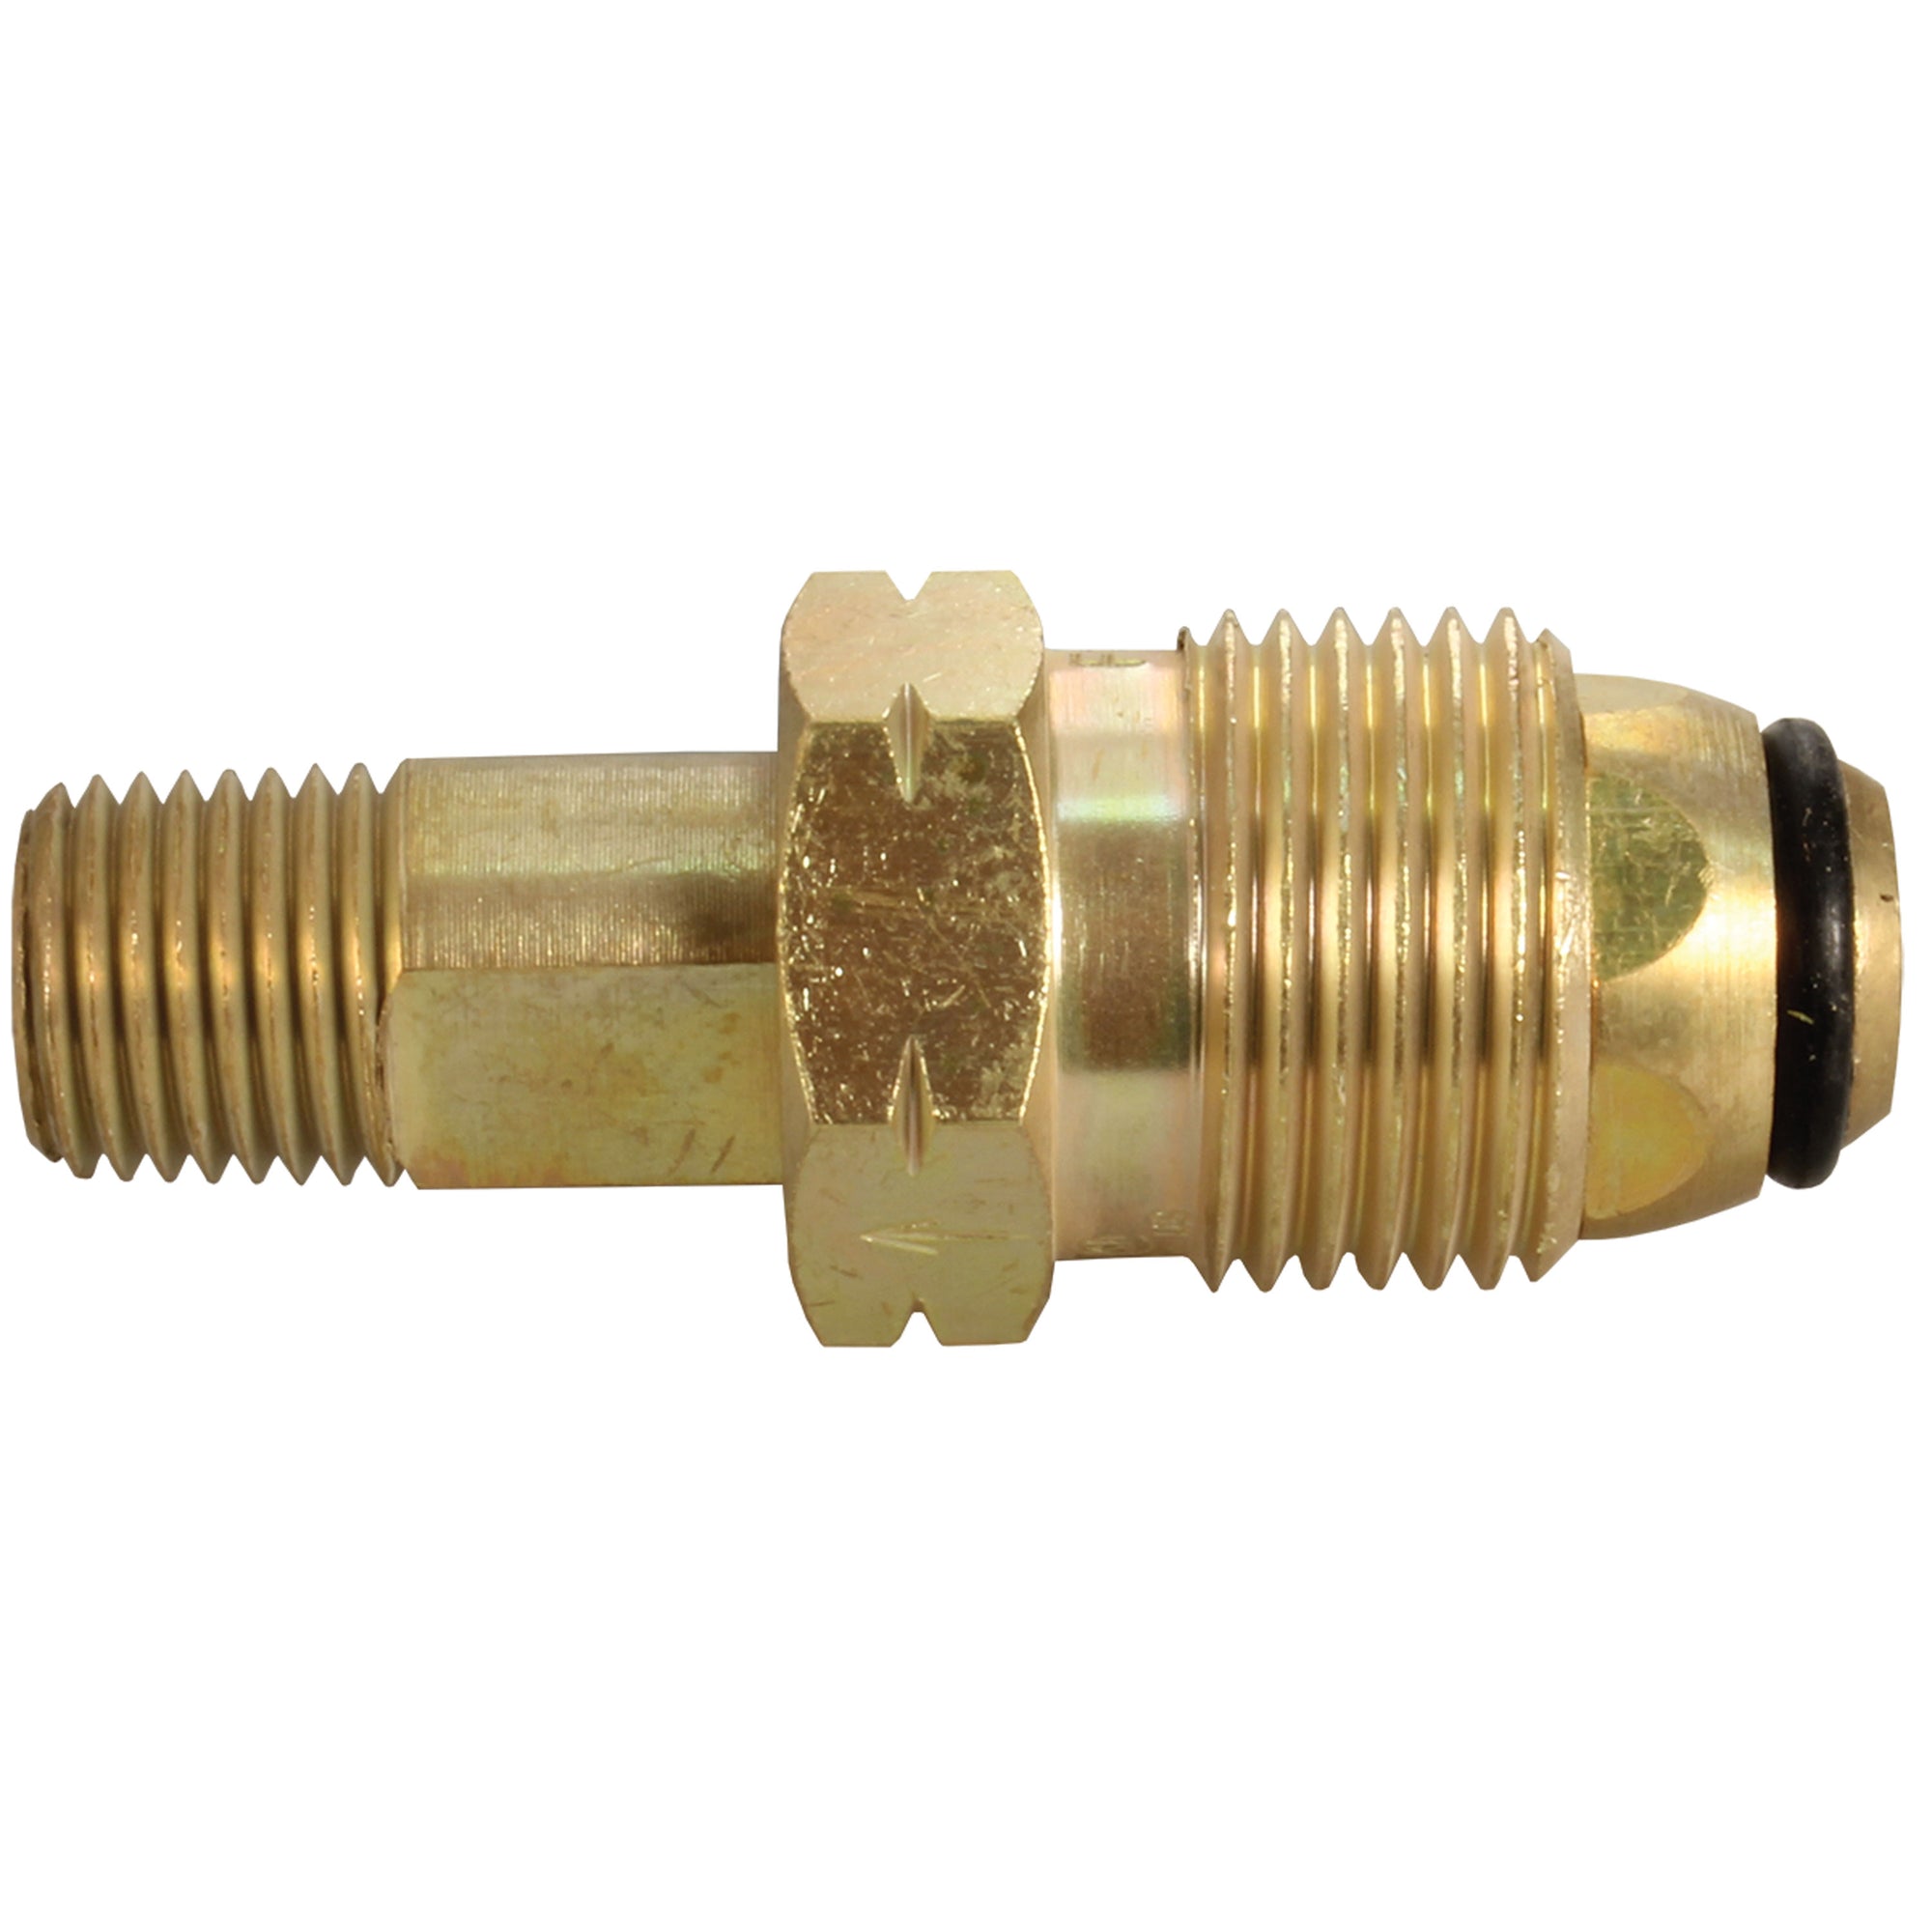 JR Products 07-30075 Excess Flow Pol - 1/4" MPT x Male POL 2-3/8" Long